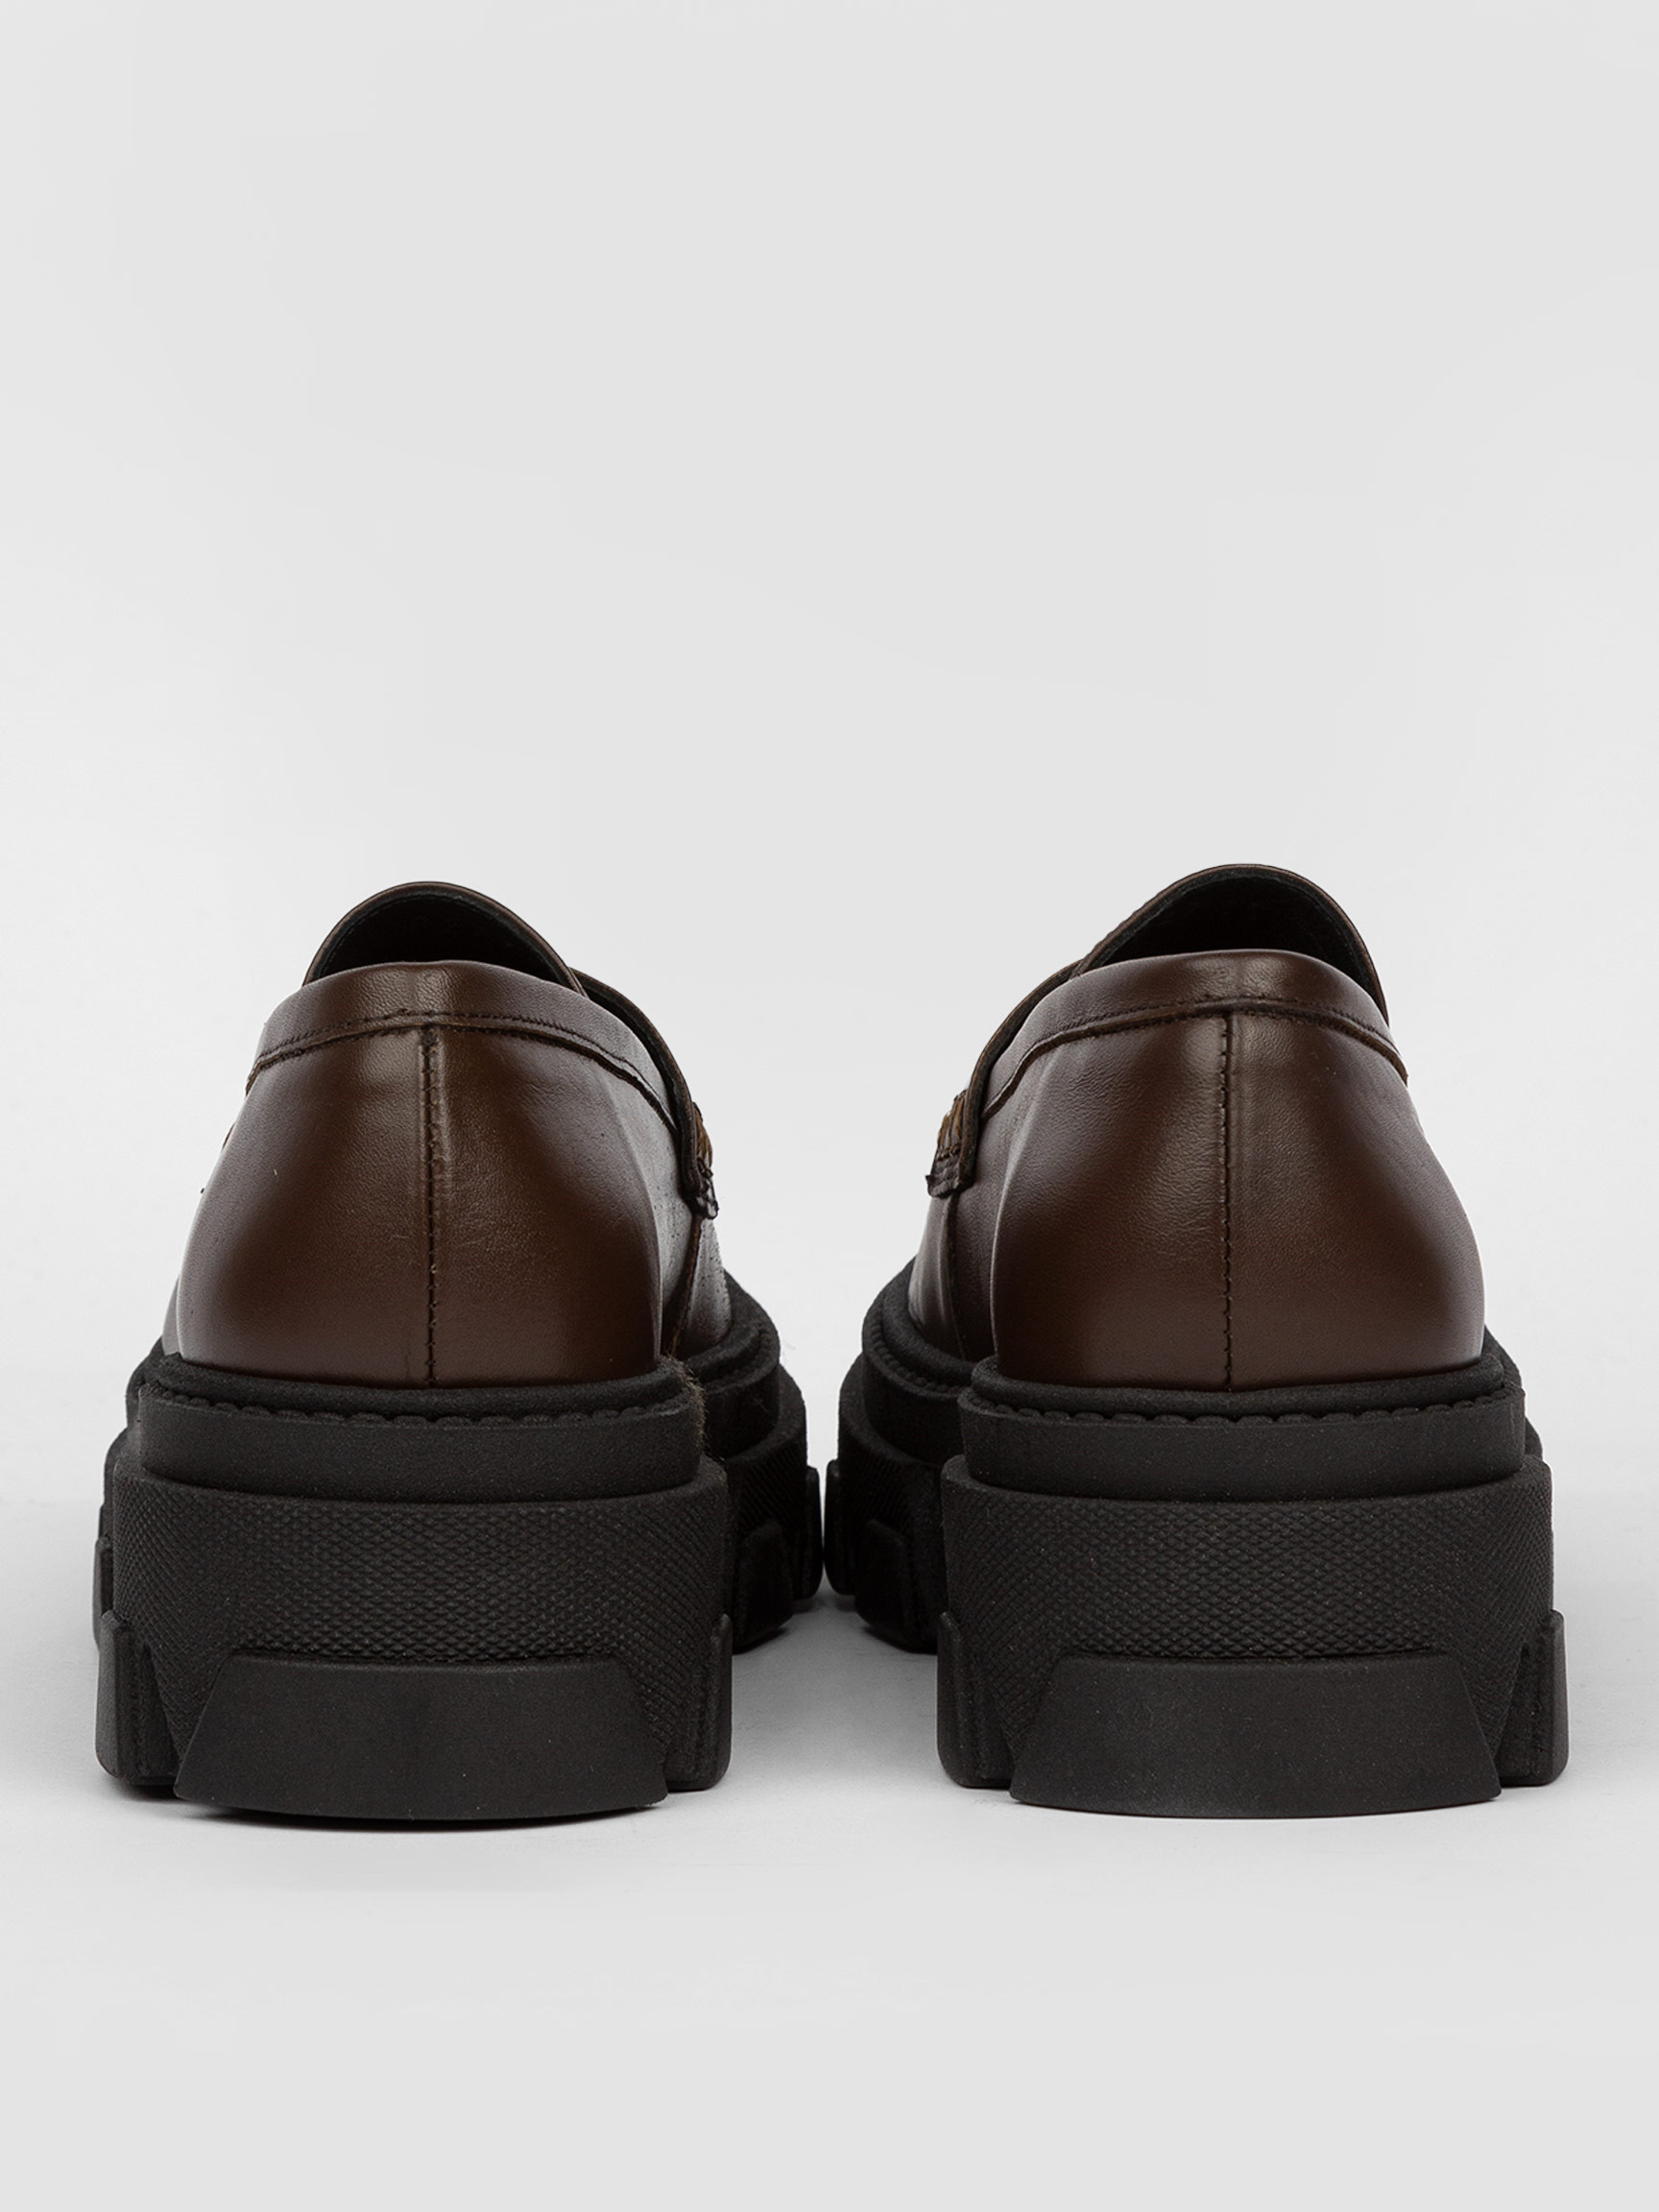 ALOHAS | SHOES | BALLET FLATS AND LOAFERS